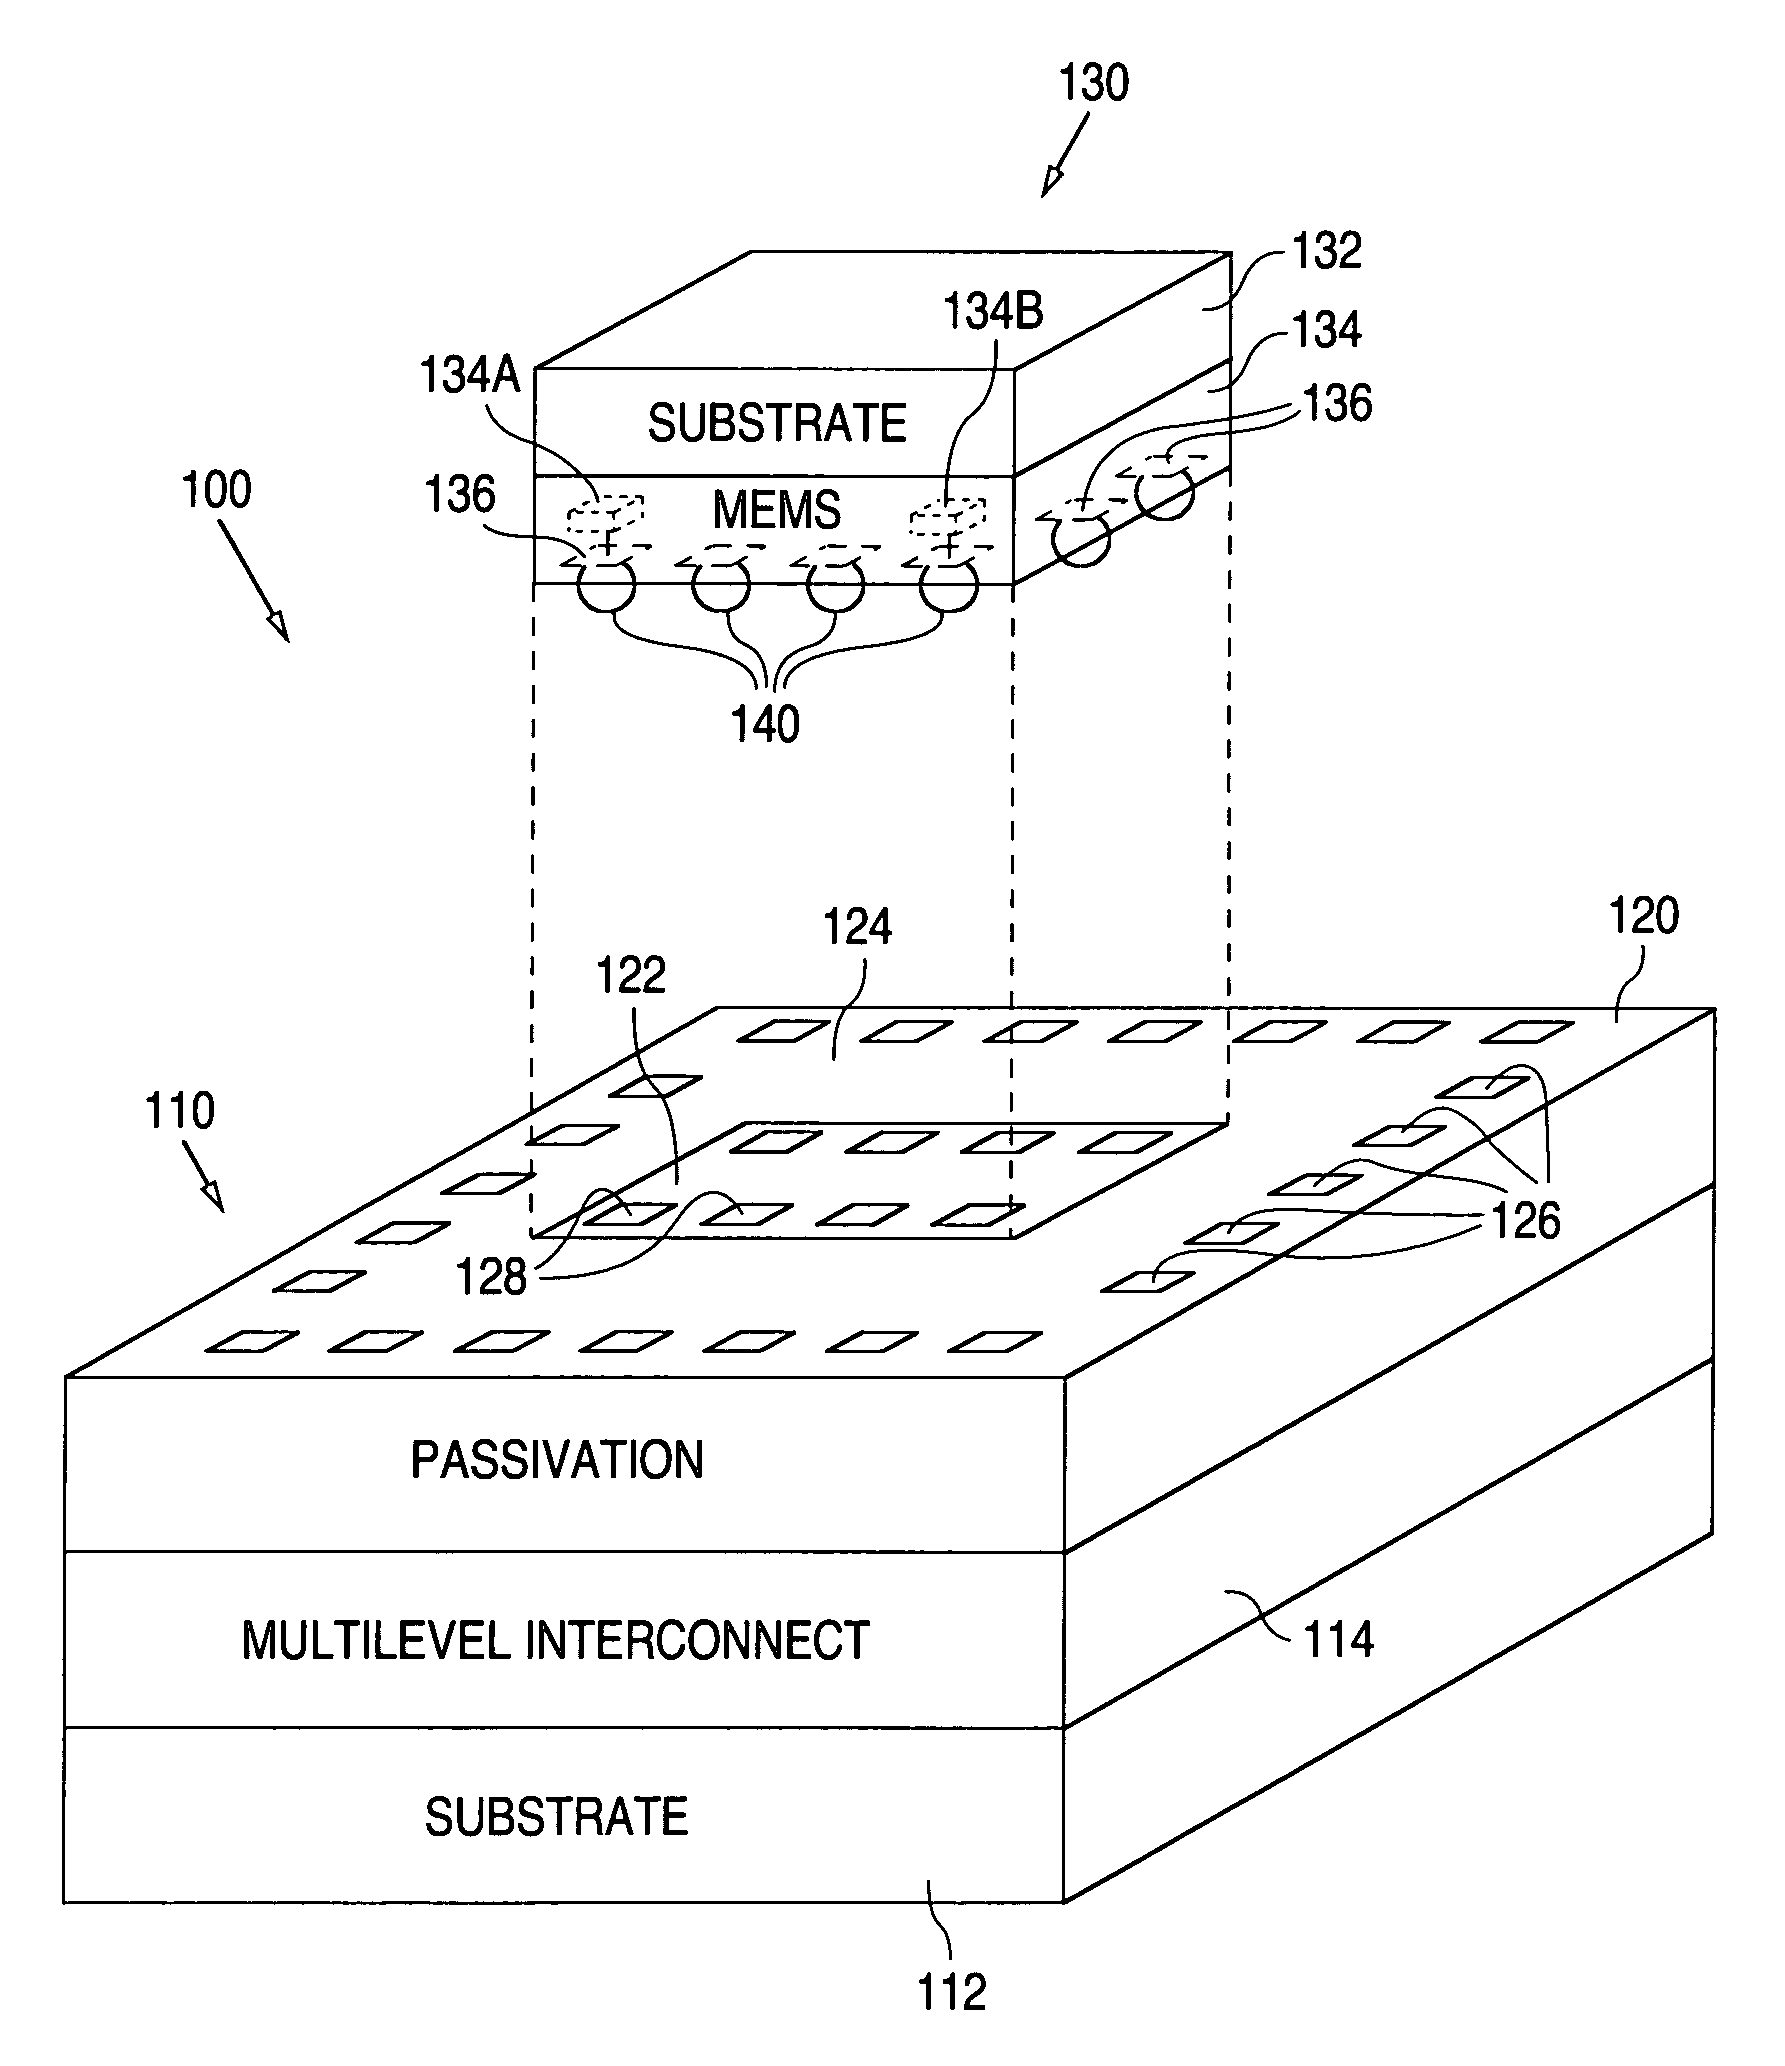 Method of forming the integrated circuit having a die with high Q inductors and capacitors attached to a die with a circuit as a flip chip